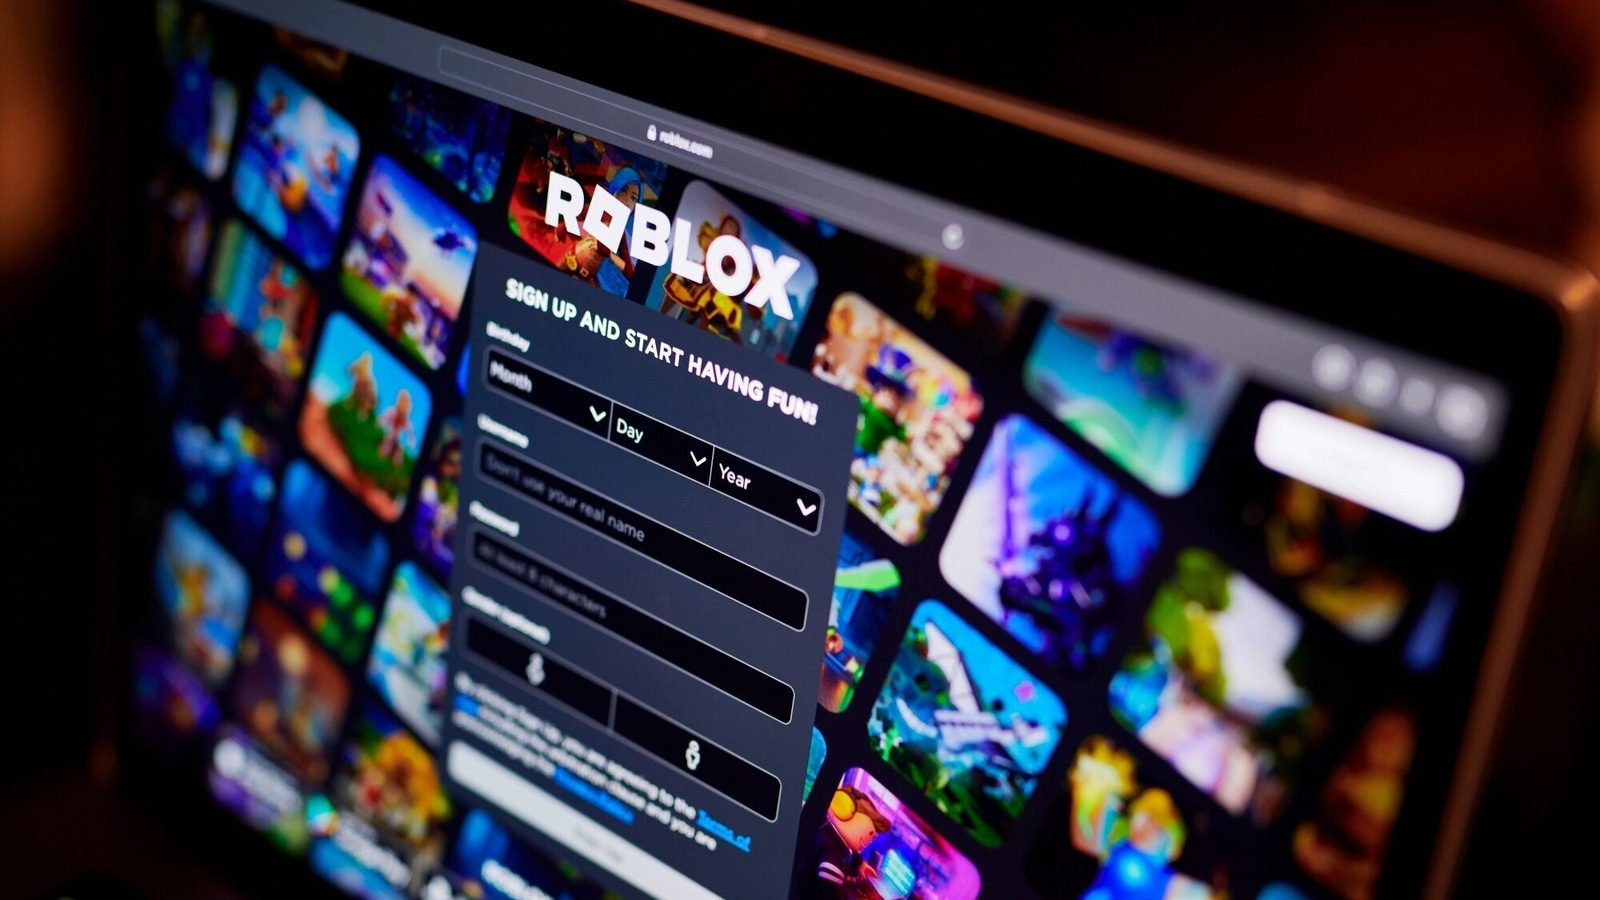 Roblox launches in-experience subscriptions, developers to benefit from new revenue streams